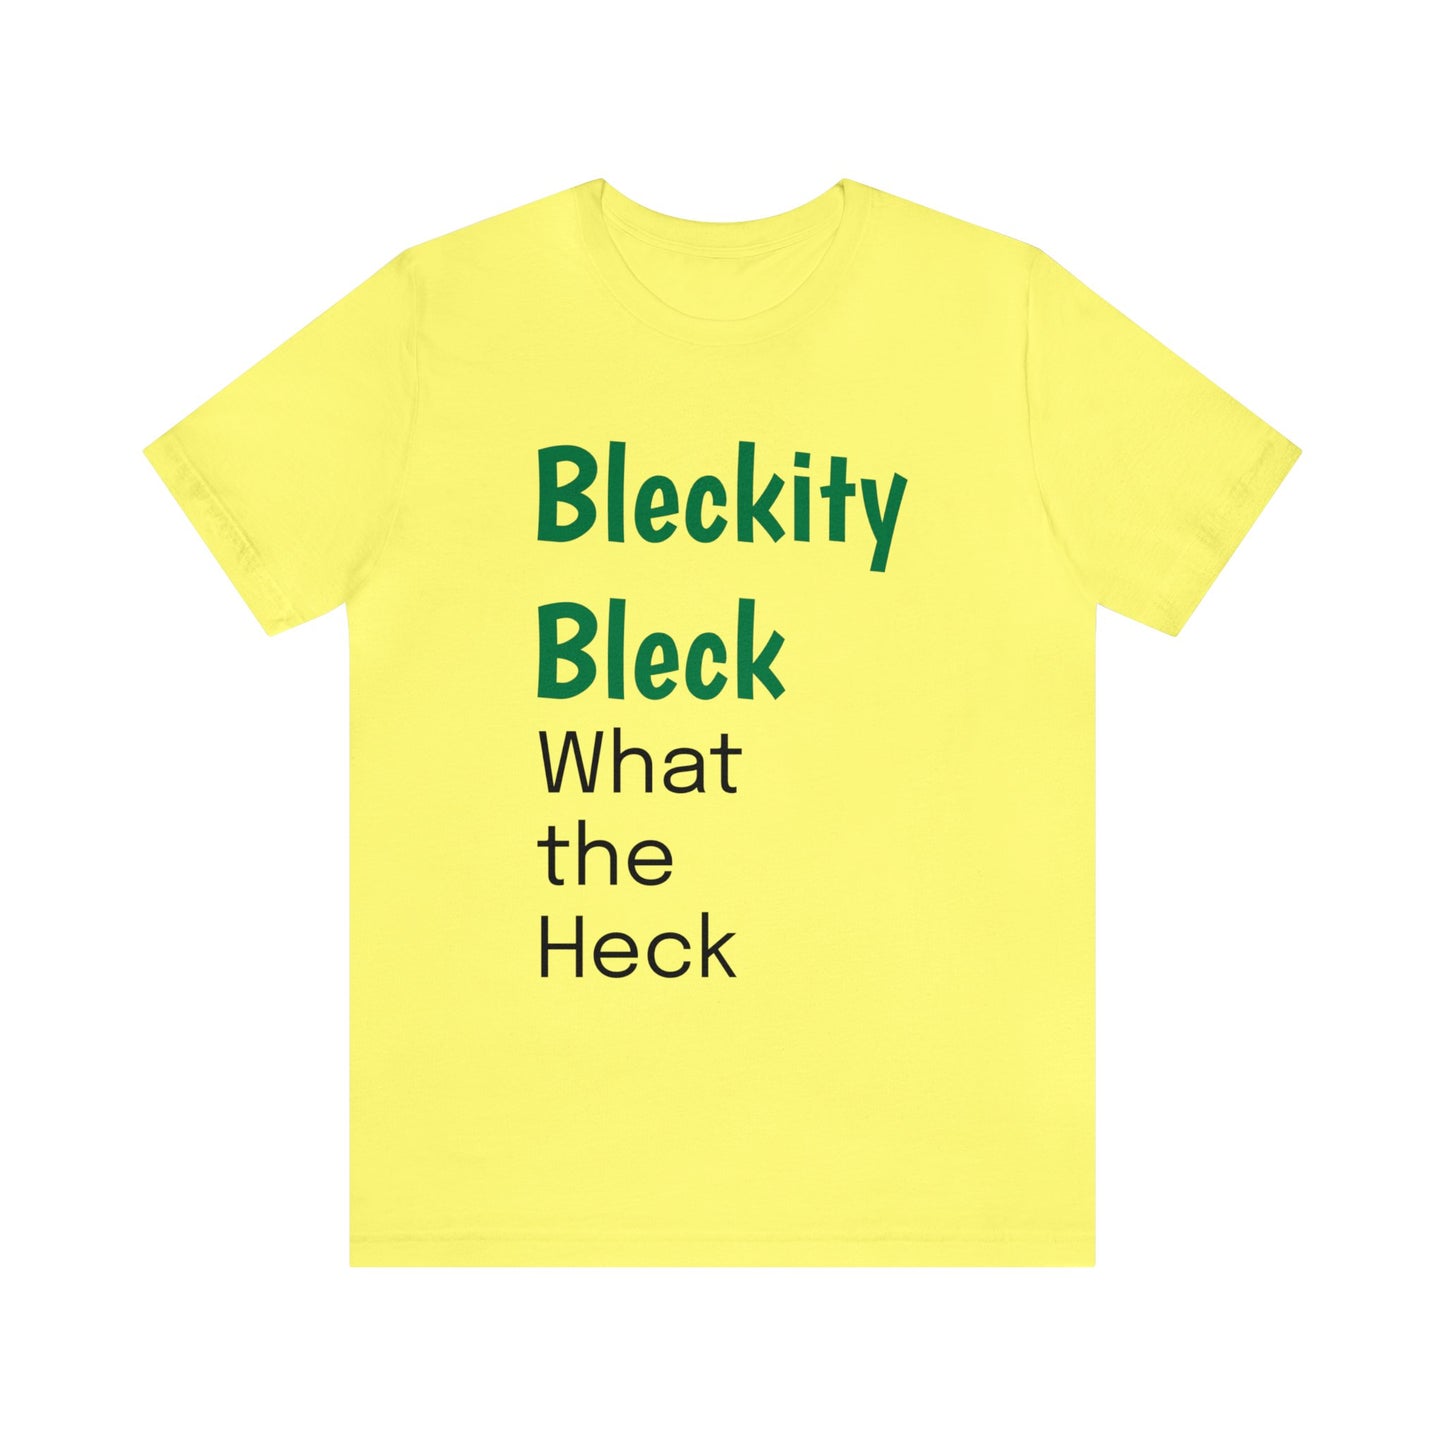 Chrisism No. 4 - Bleckity Bleck, What the Heck